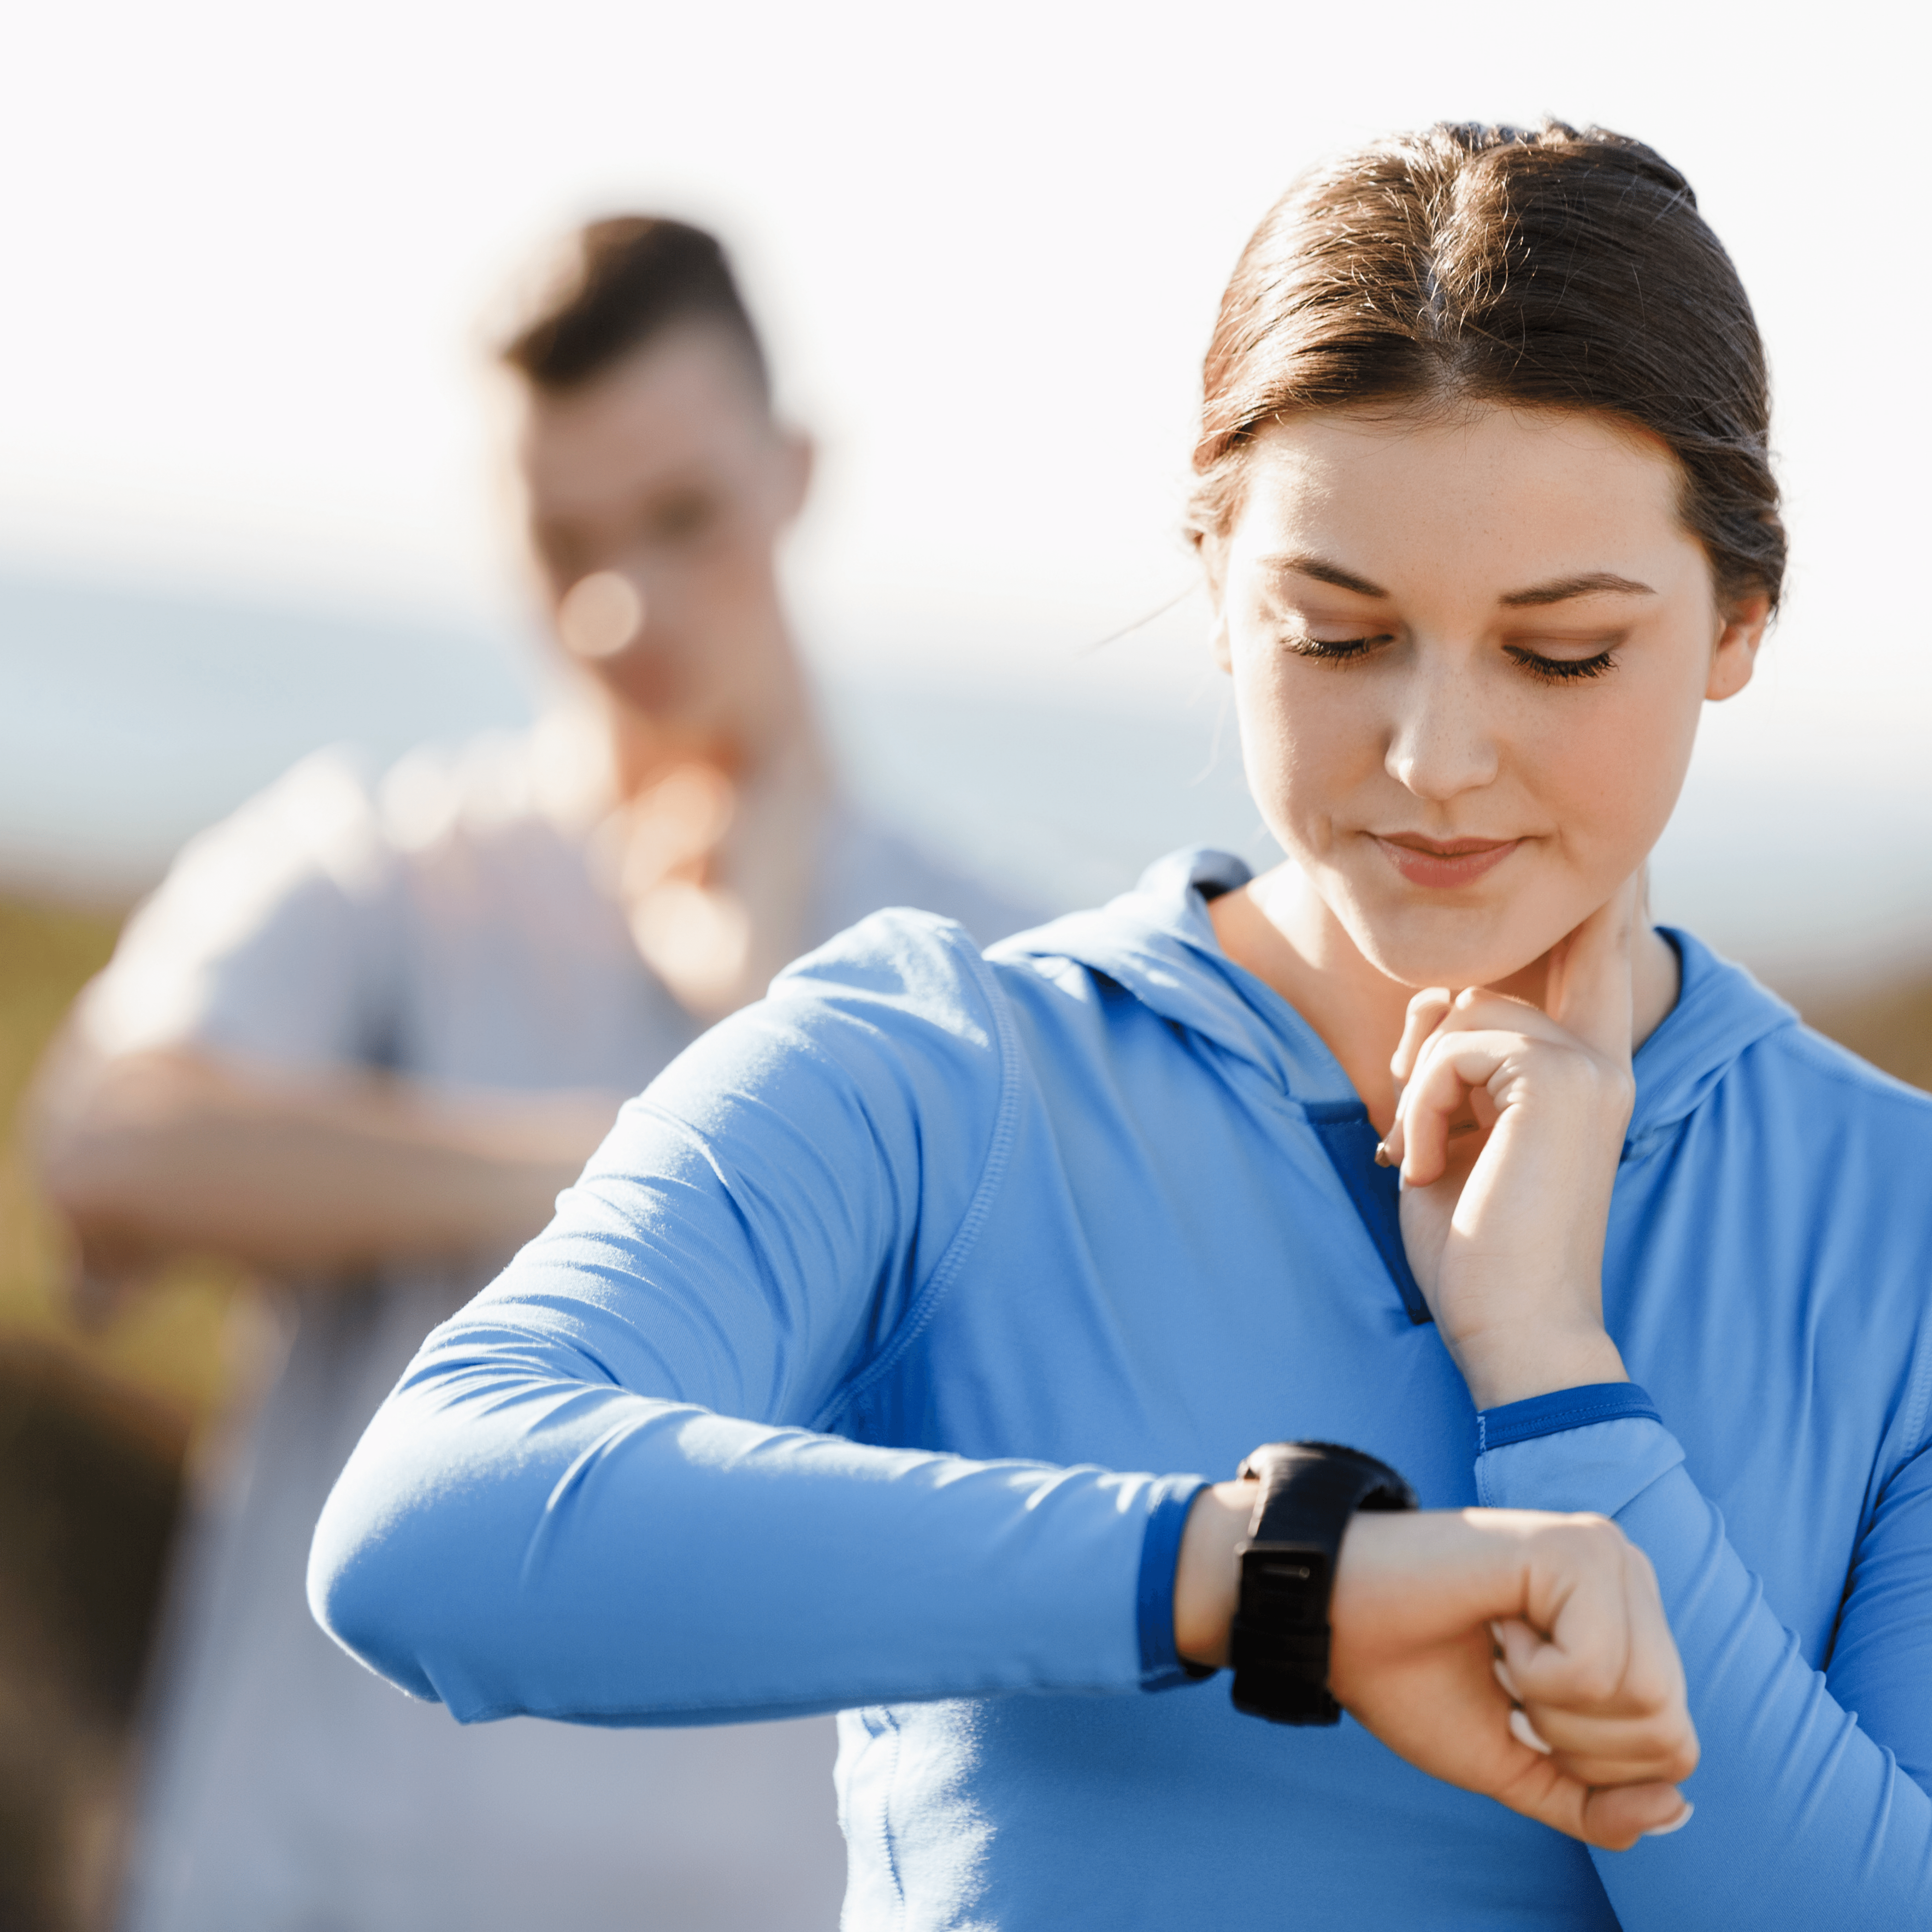 How to find your target heart rate when working out